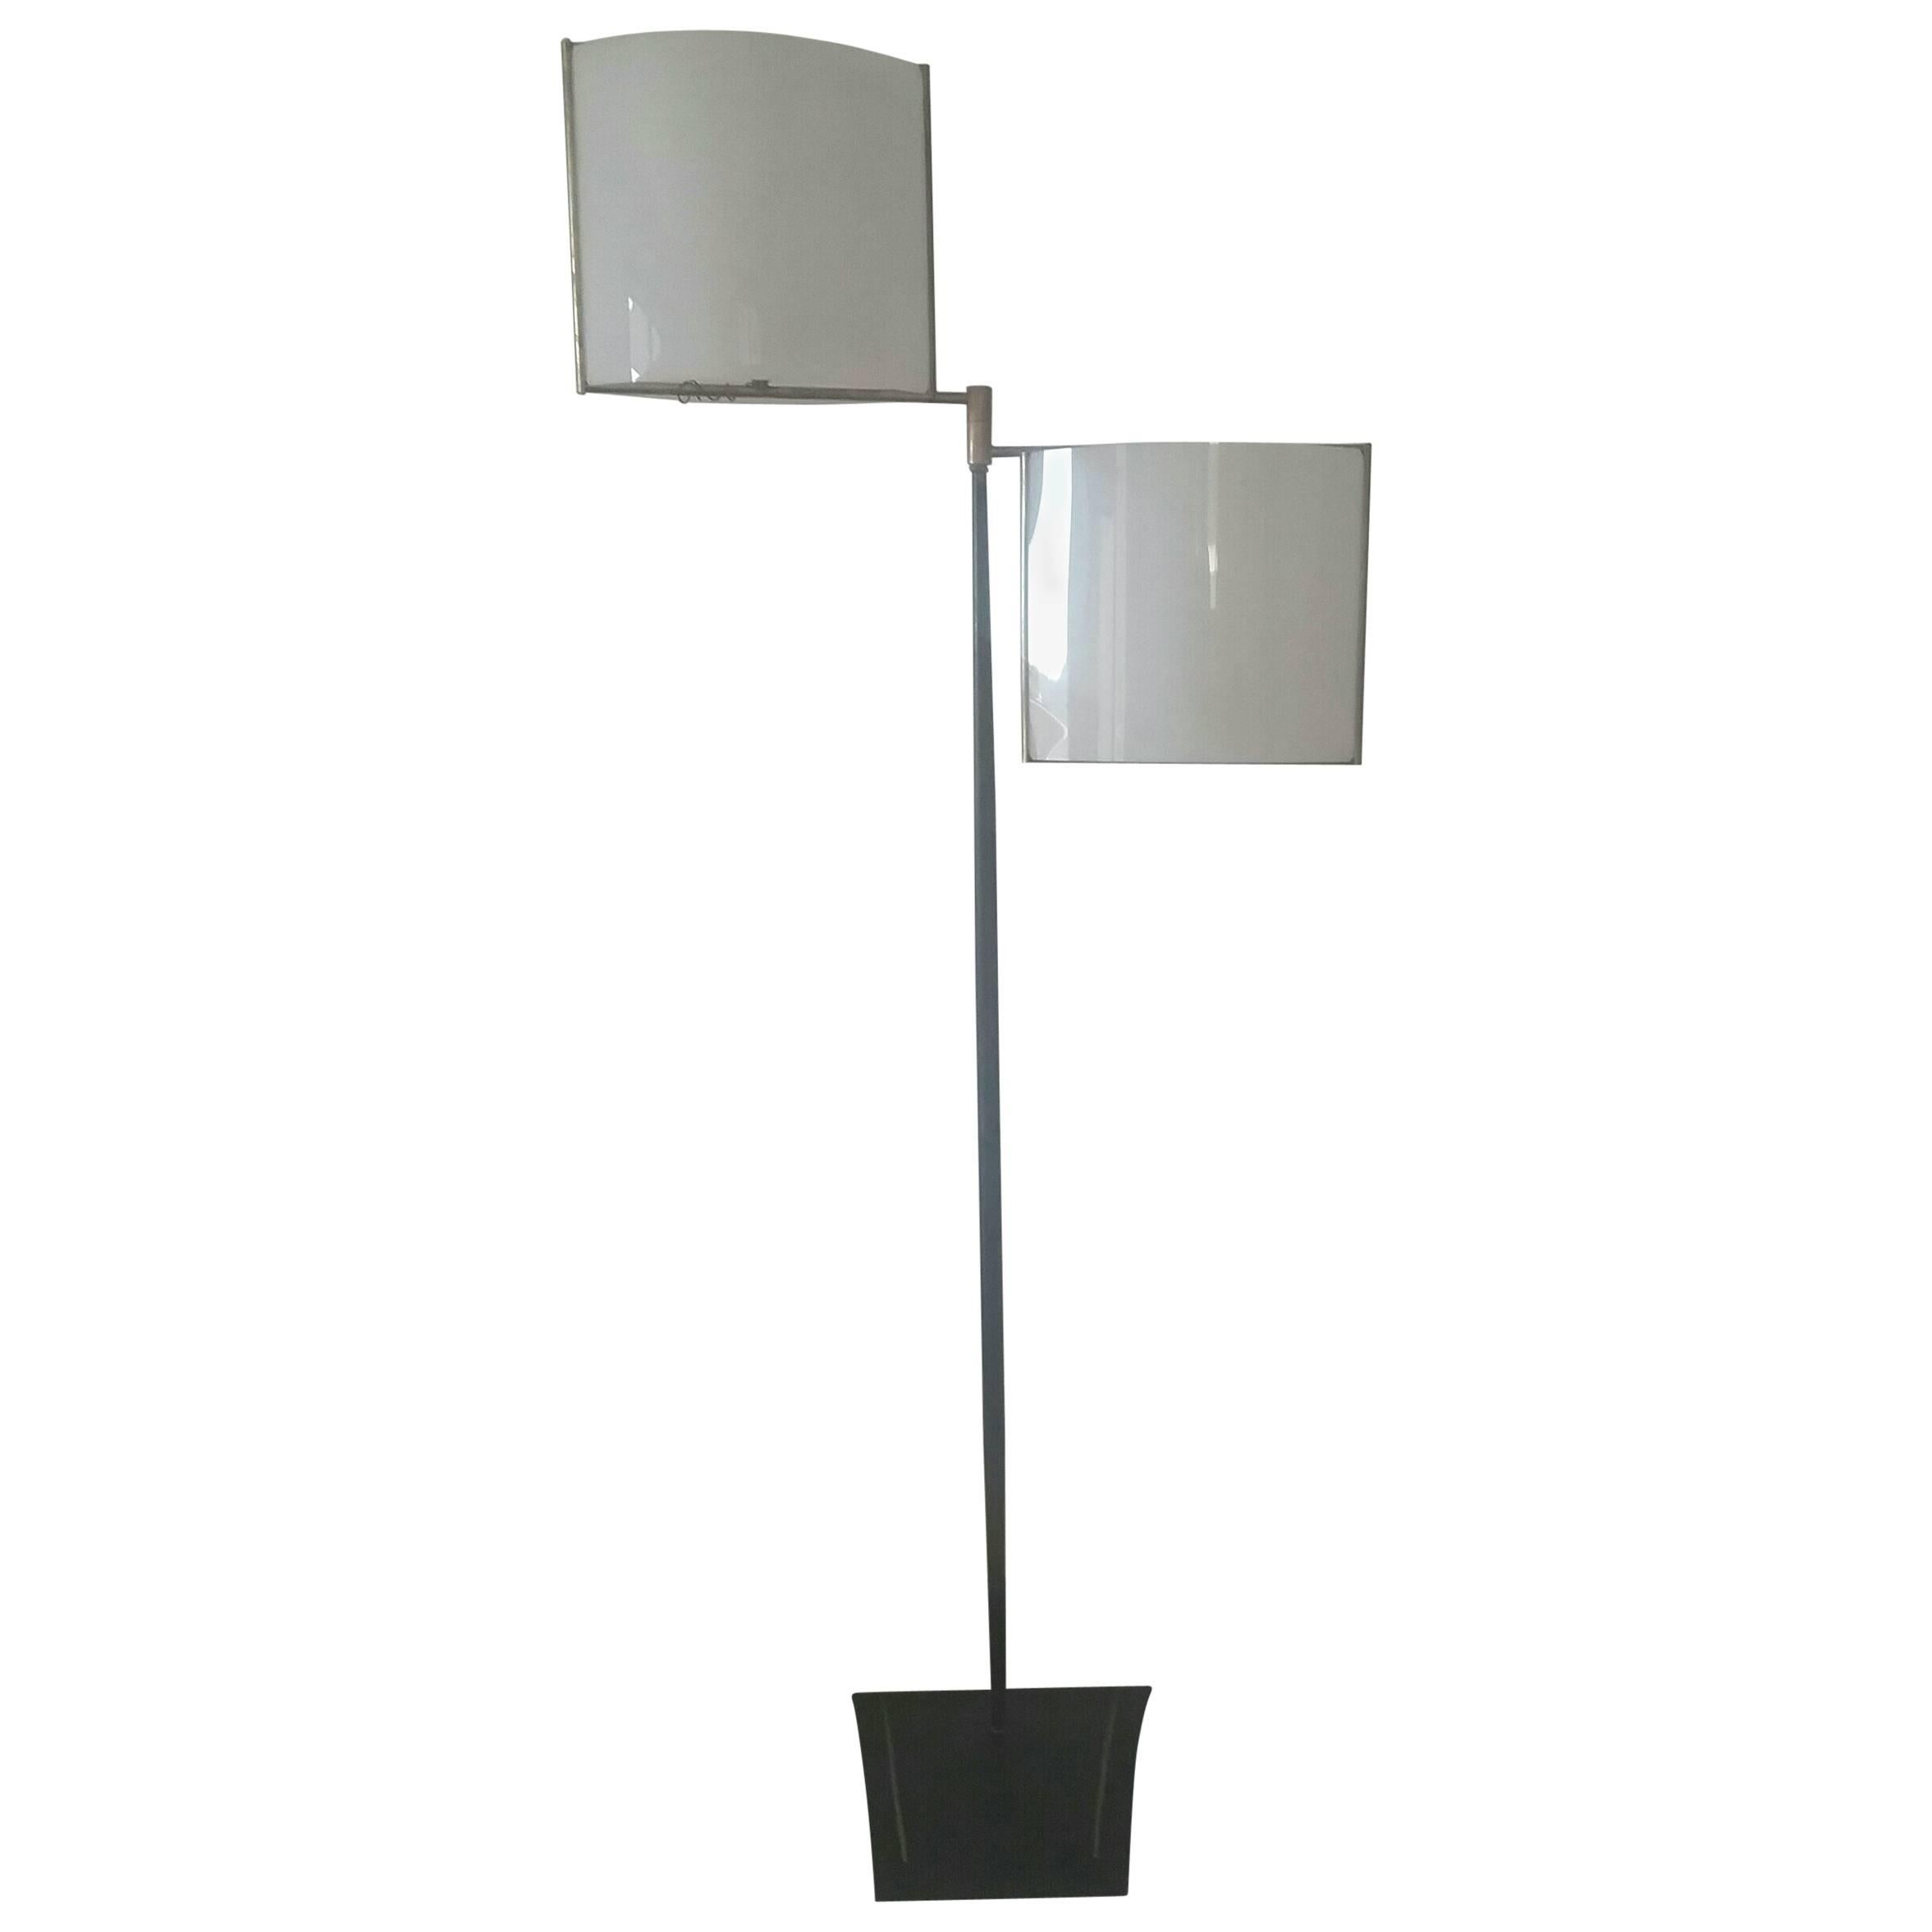 Large Orientable Double Perspex Shade Floor Lamp, Jacques Biny, France, 1950